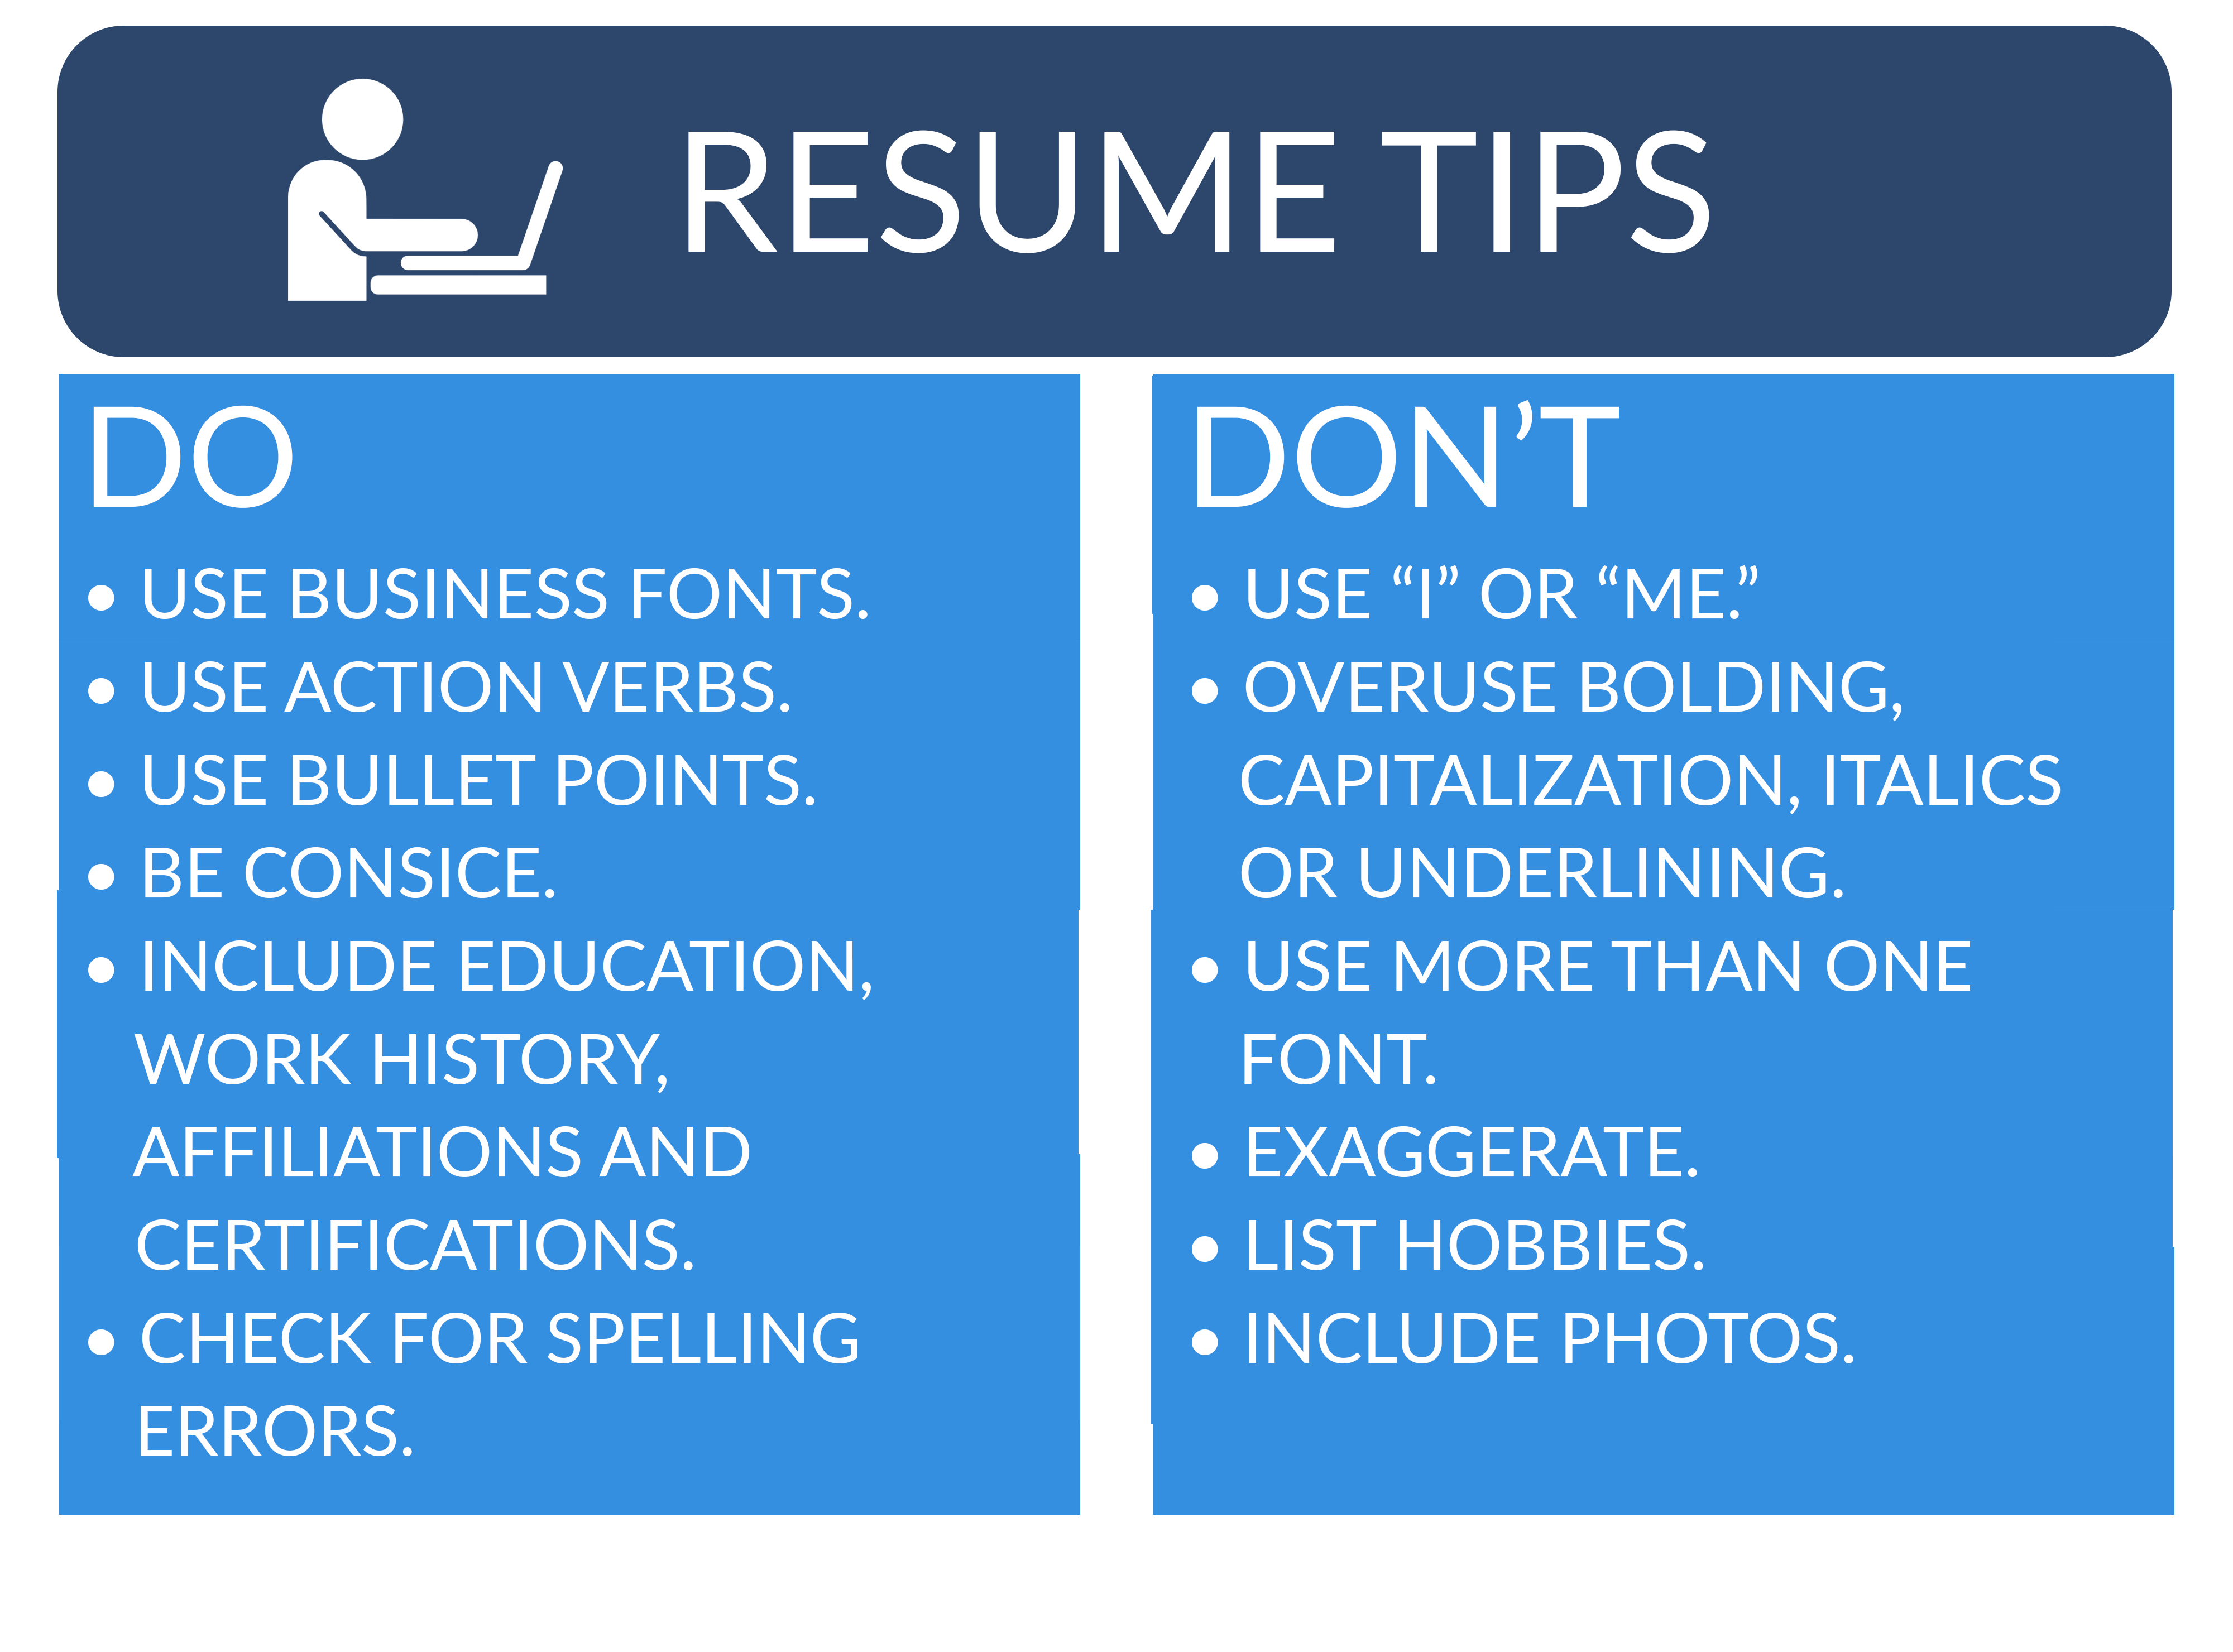 Resume Tips Do Use Business Fonts, Use Action Verbs, Use Bullet , Points, Be Concise, Include Education, Work History Affiliations, Certifications and Community Activities, Check for Spelling Errors. Don't Use "I" or "Me", Overuse Bolding, Capitlization, Italics, or Underlining, Use more than one Font, Exaggerate, List Hobbies, Include Photos.